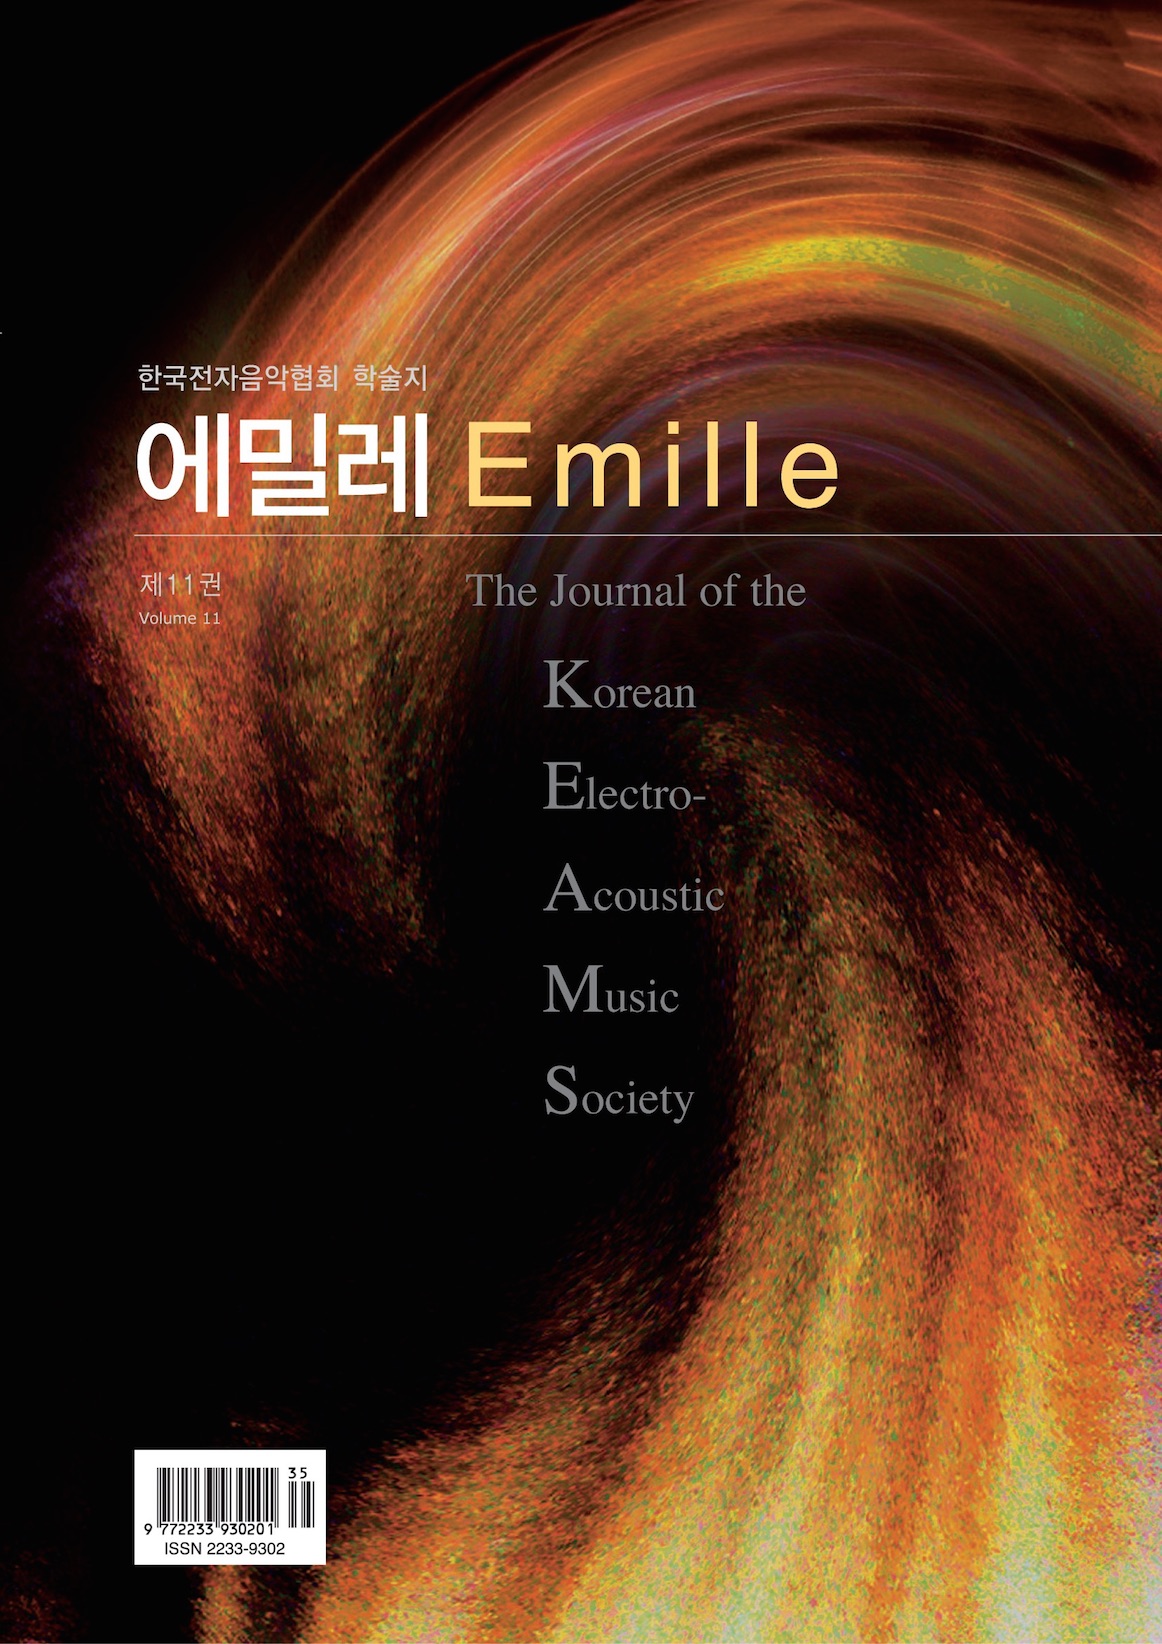 emille vol. 11 cover